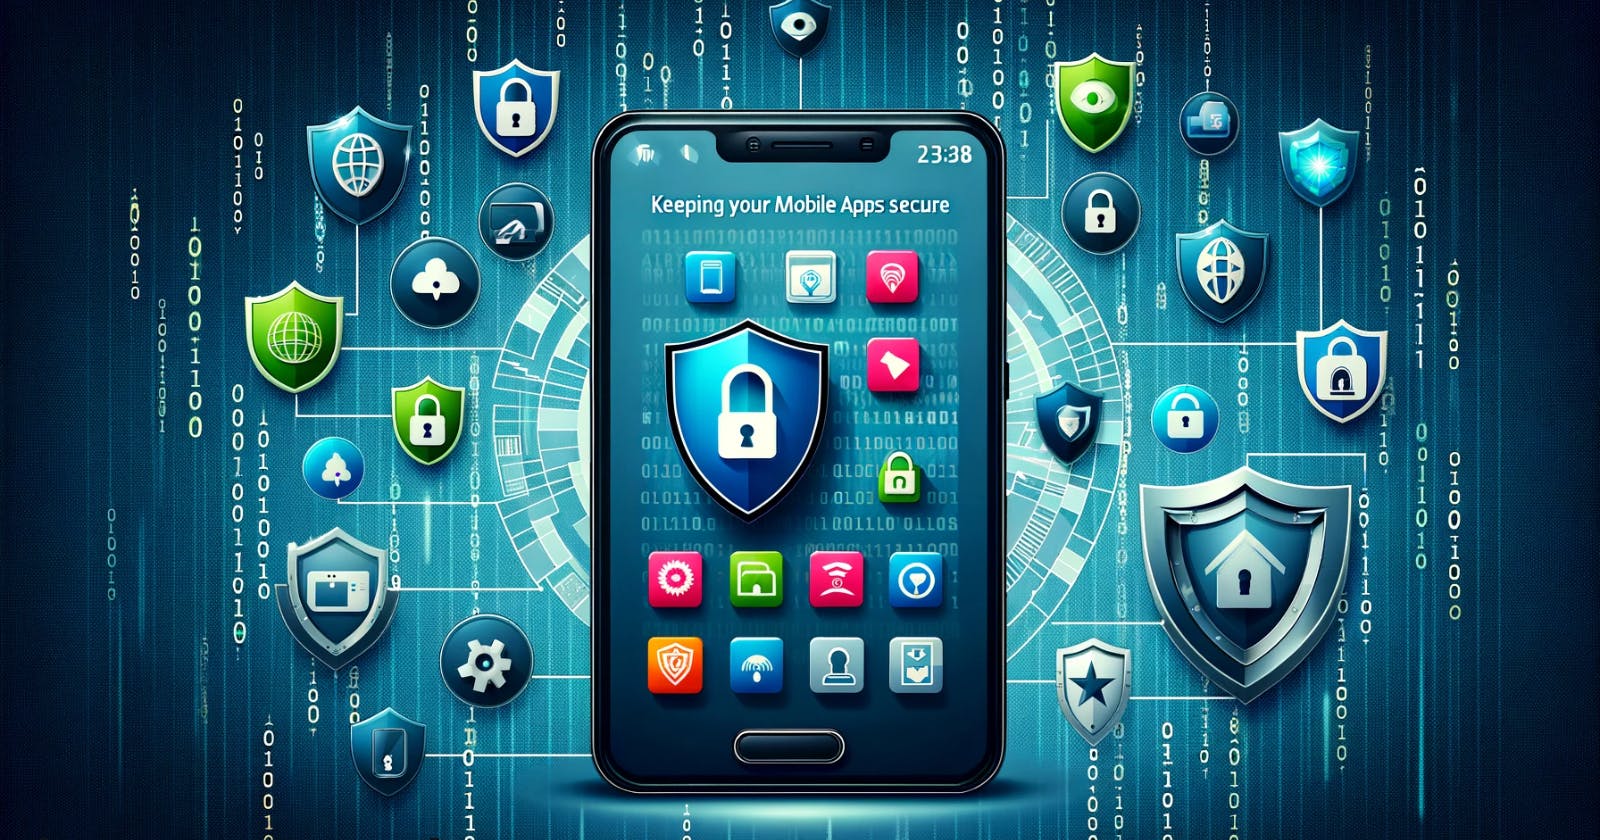 Keeping Your Mobile Apps Secure